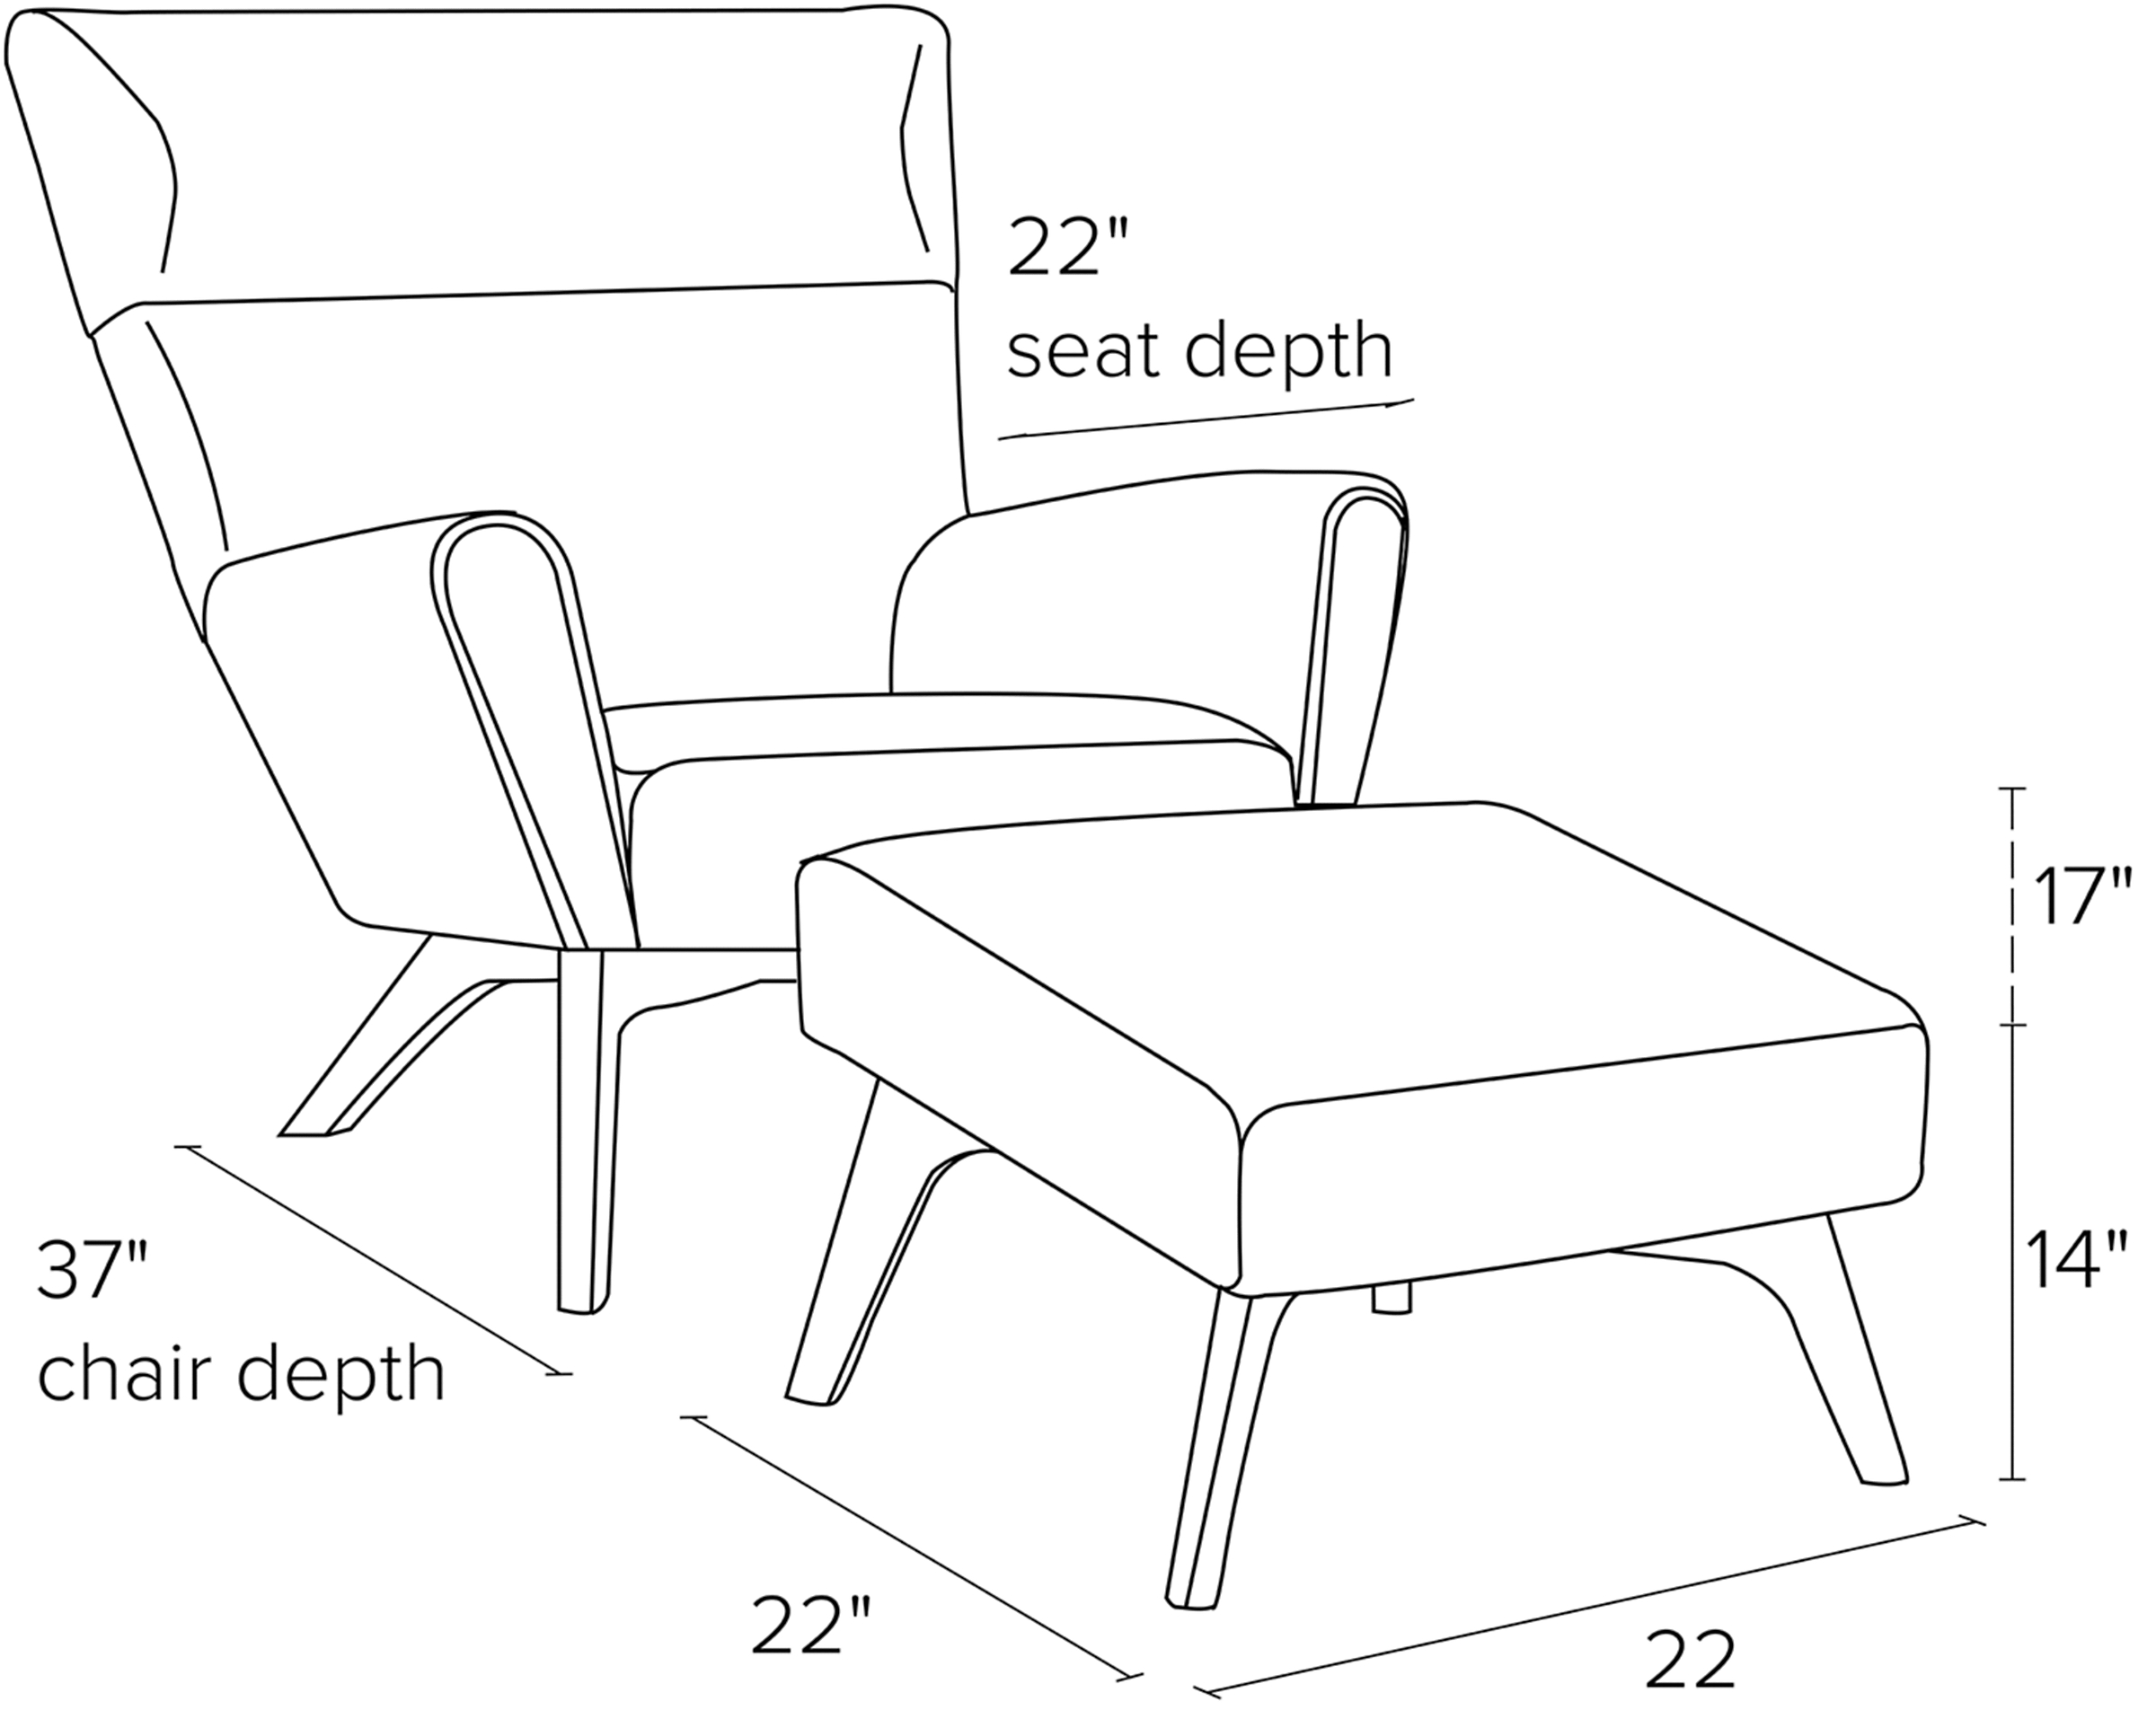 Side view dimension illustration of Boden chair.